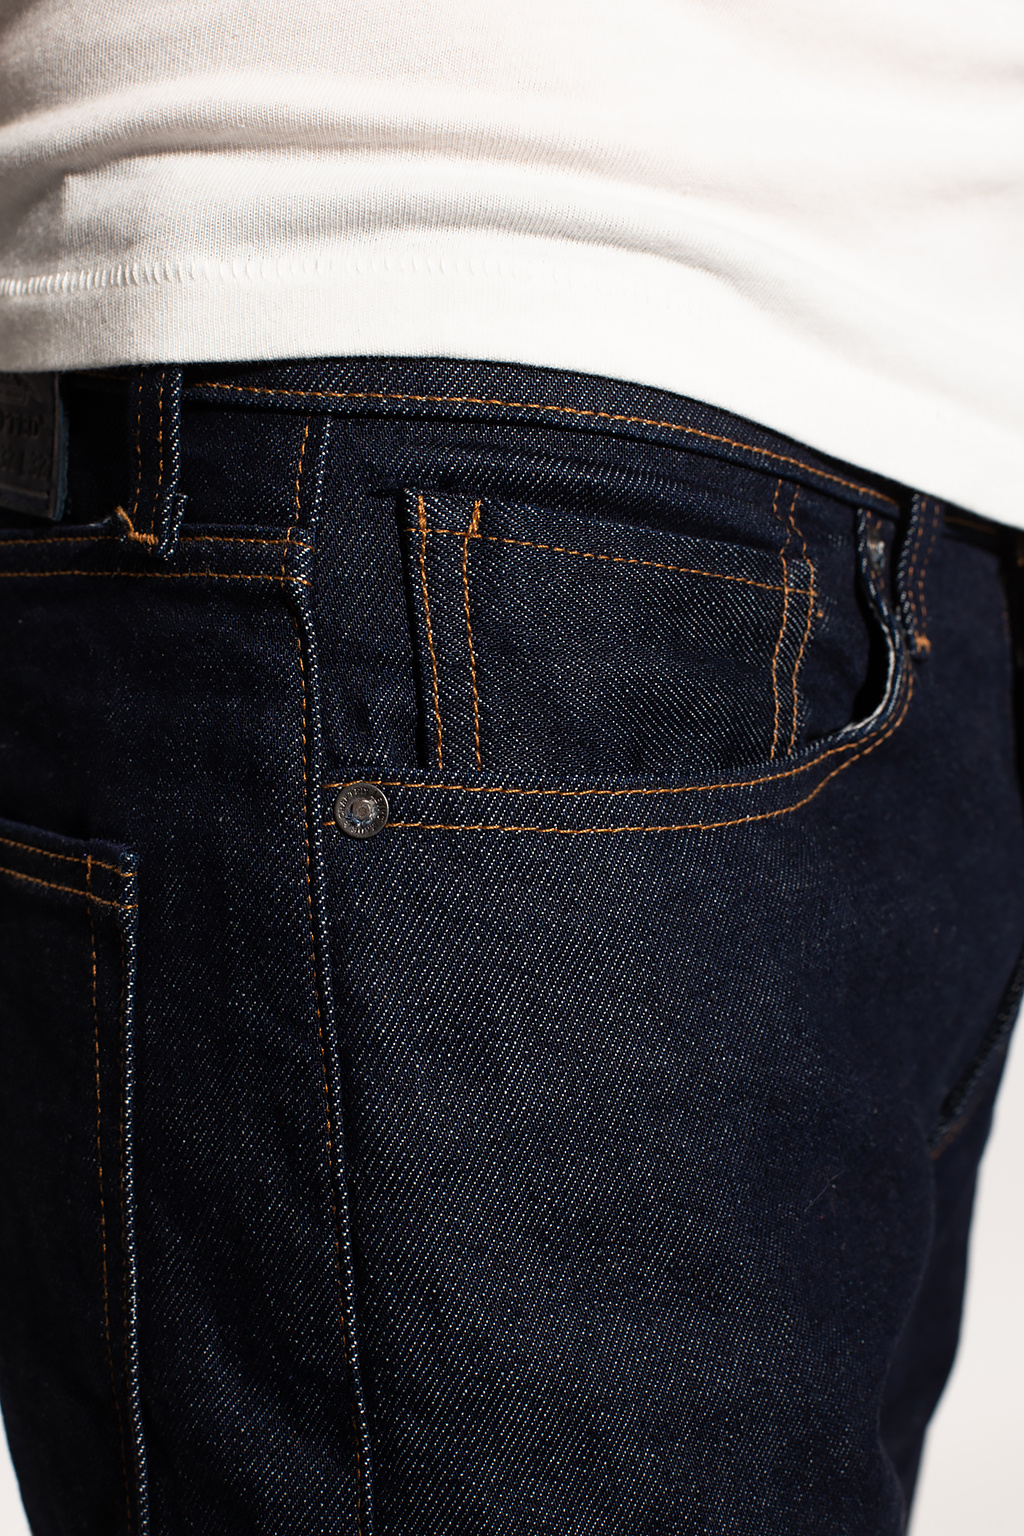 Levi's Jeans 'Made & Crafted ®' collection | Men's Clothing | Vitkac